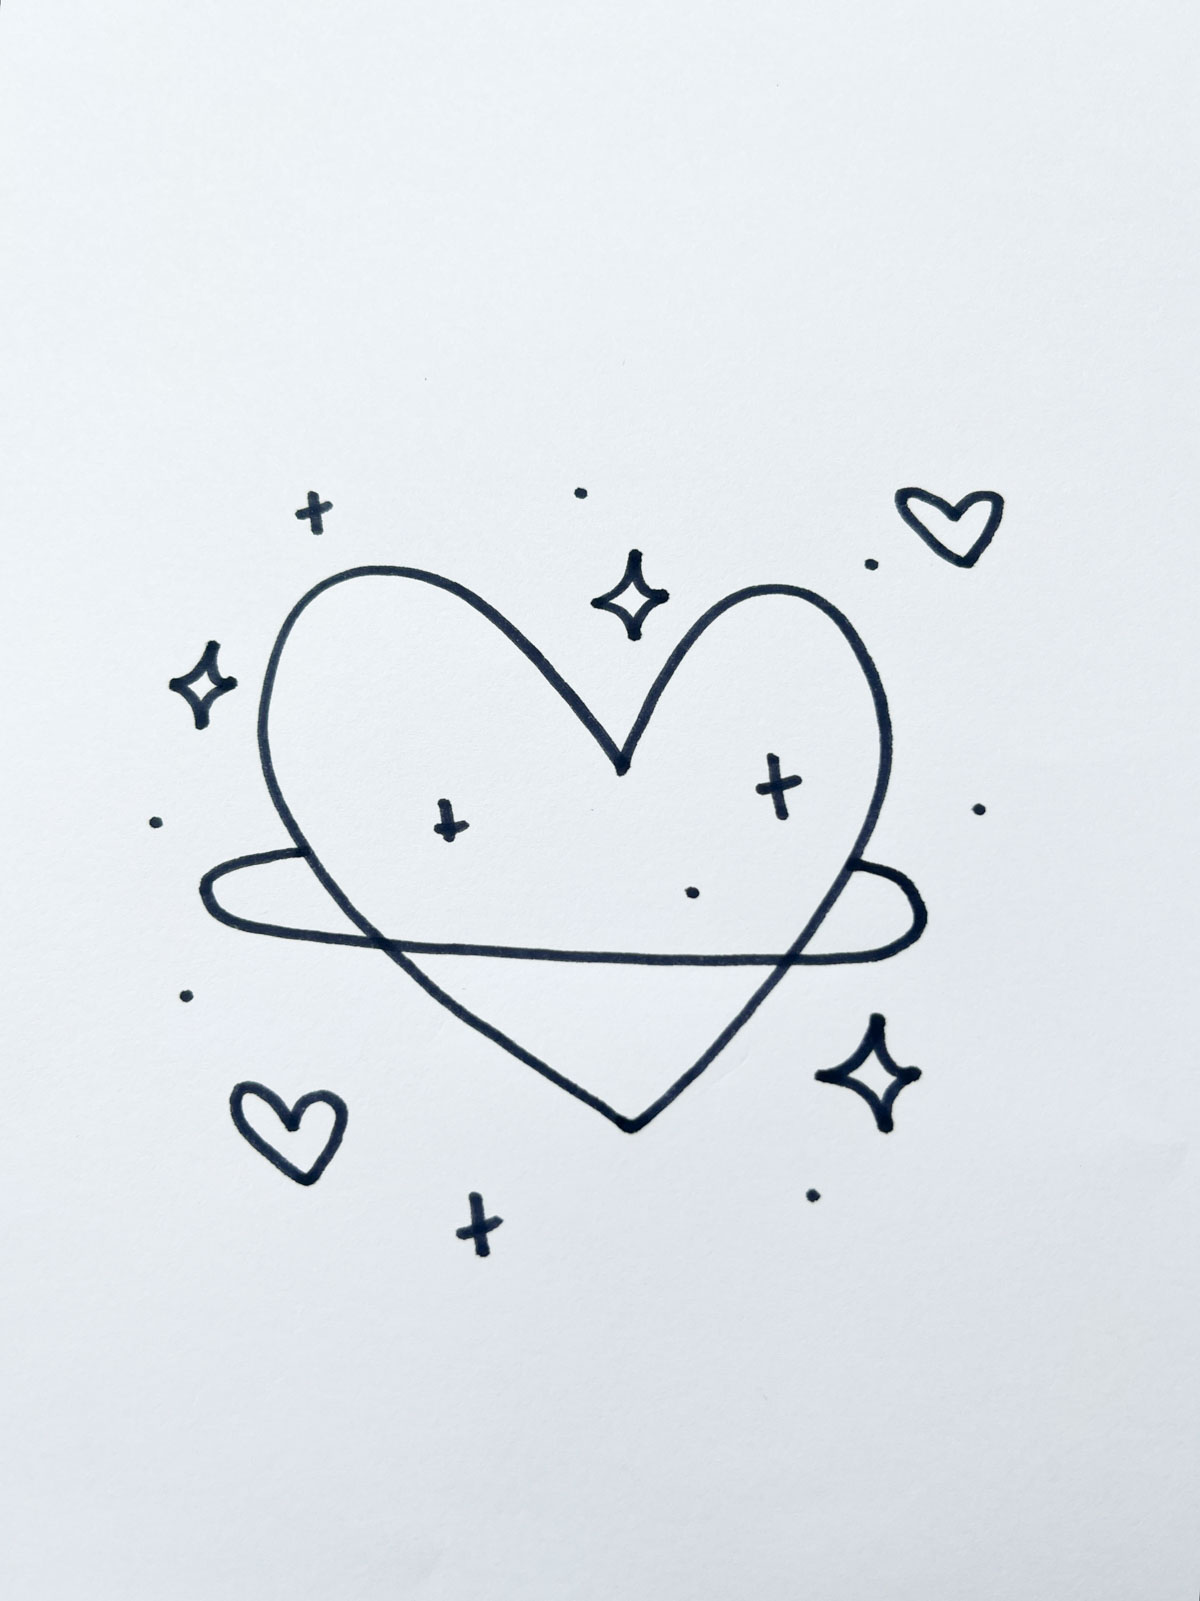 planet of love heart drawing